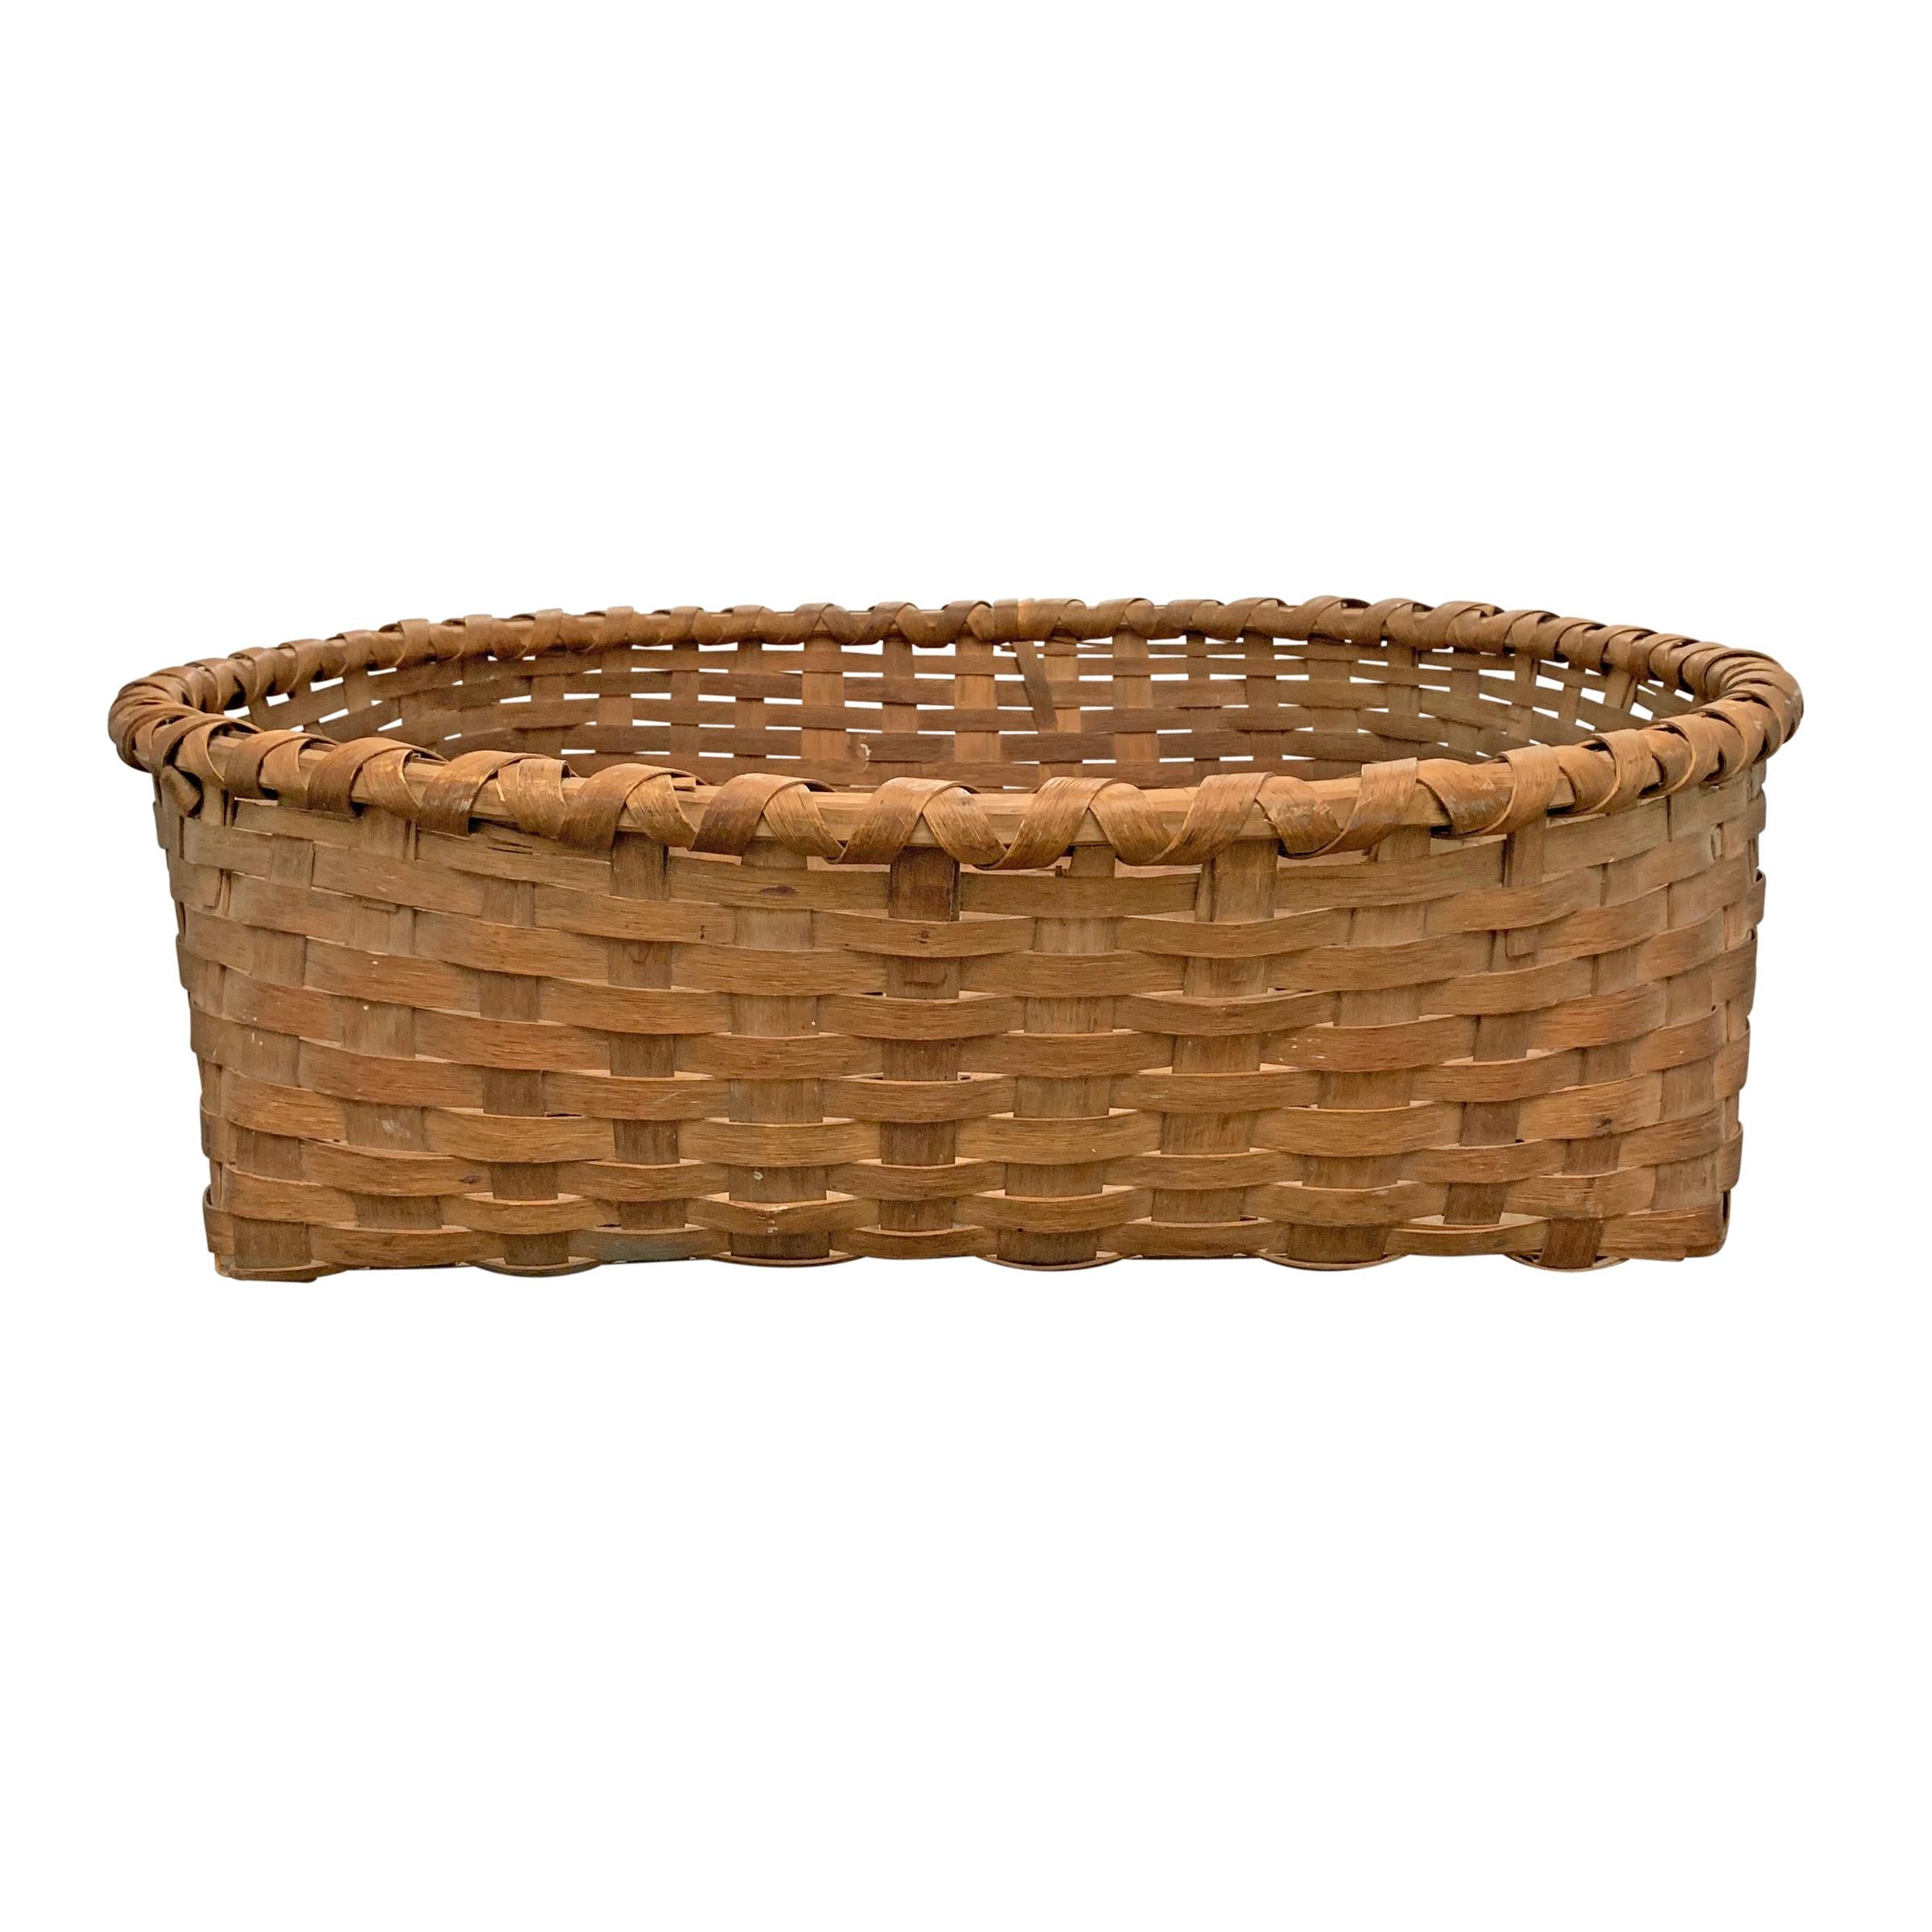 A rather large 19th century American split oak basket with a low profile, probably used to collect wool, found in upstate New York.